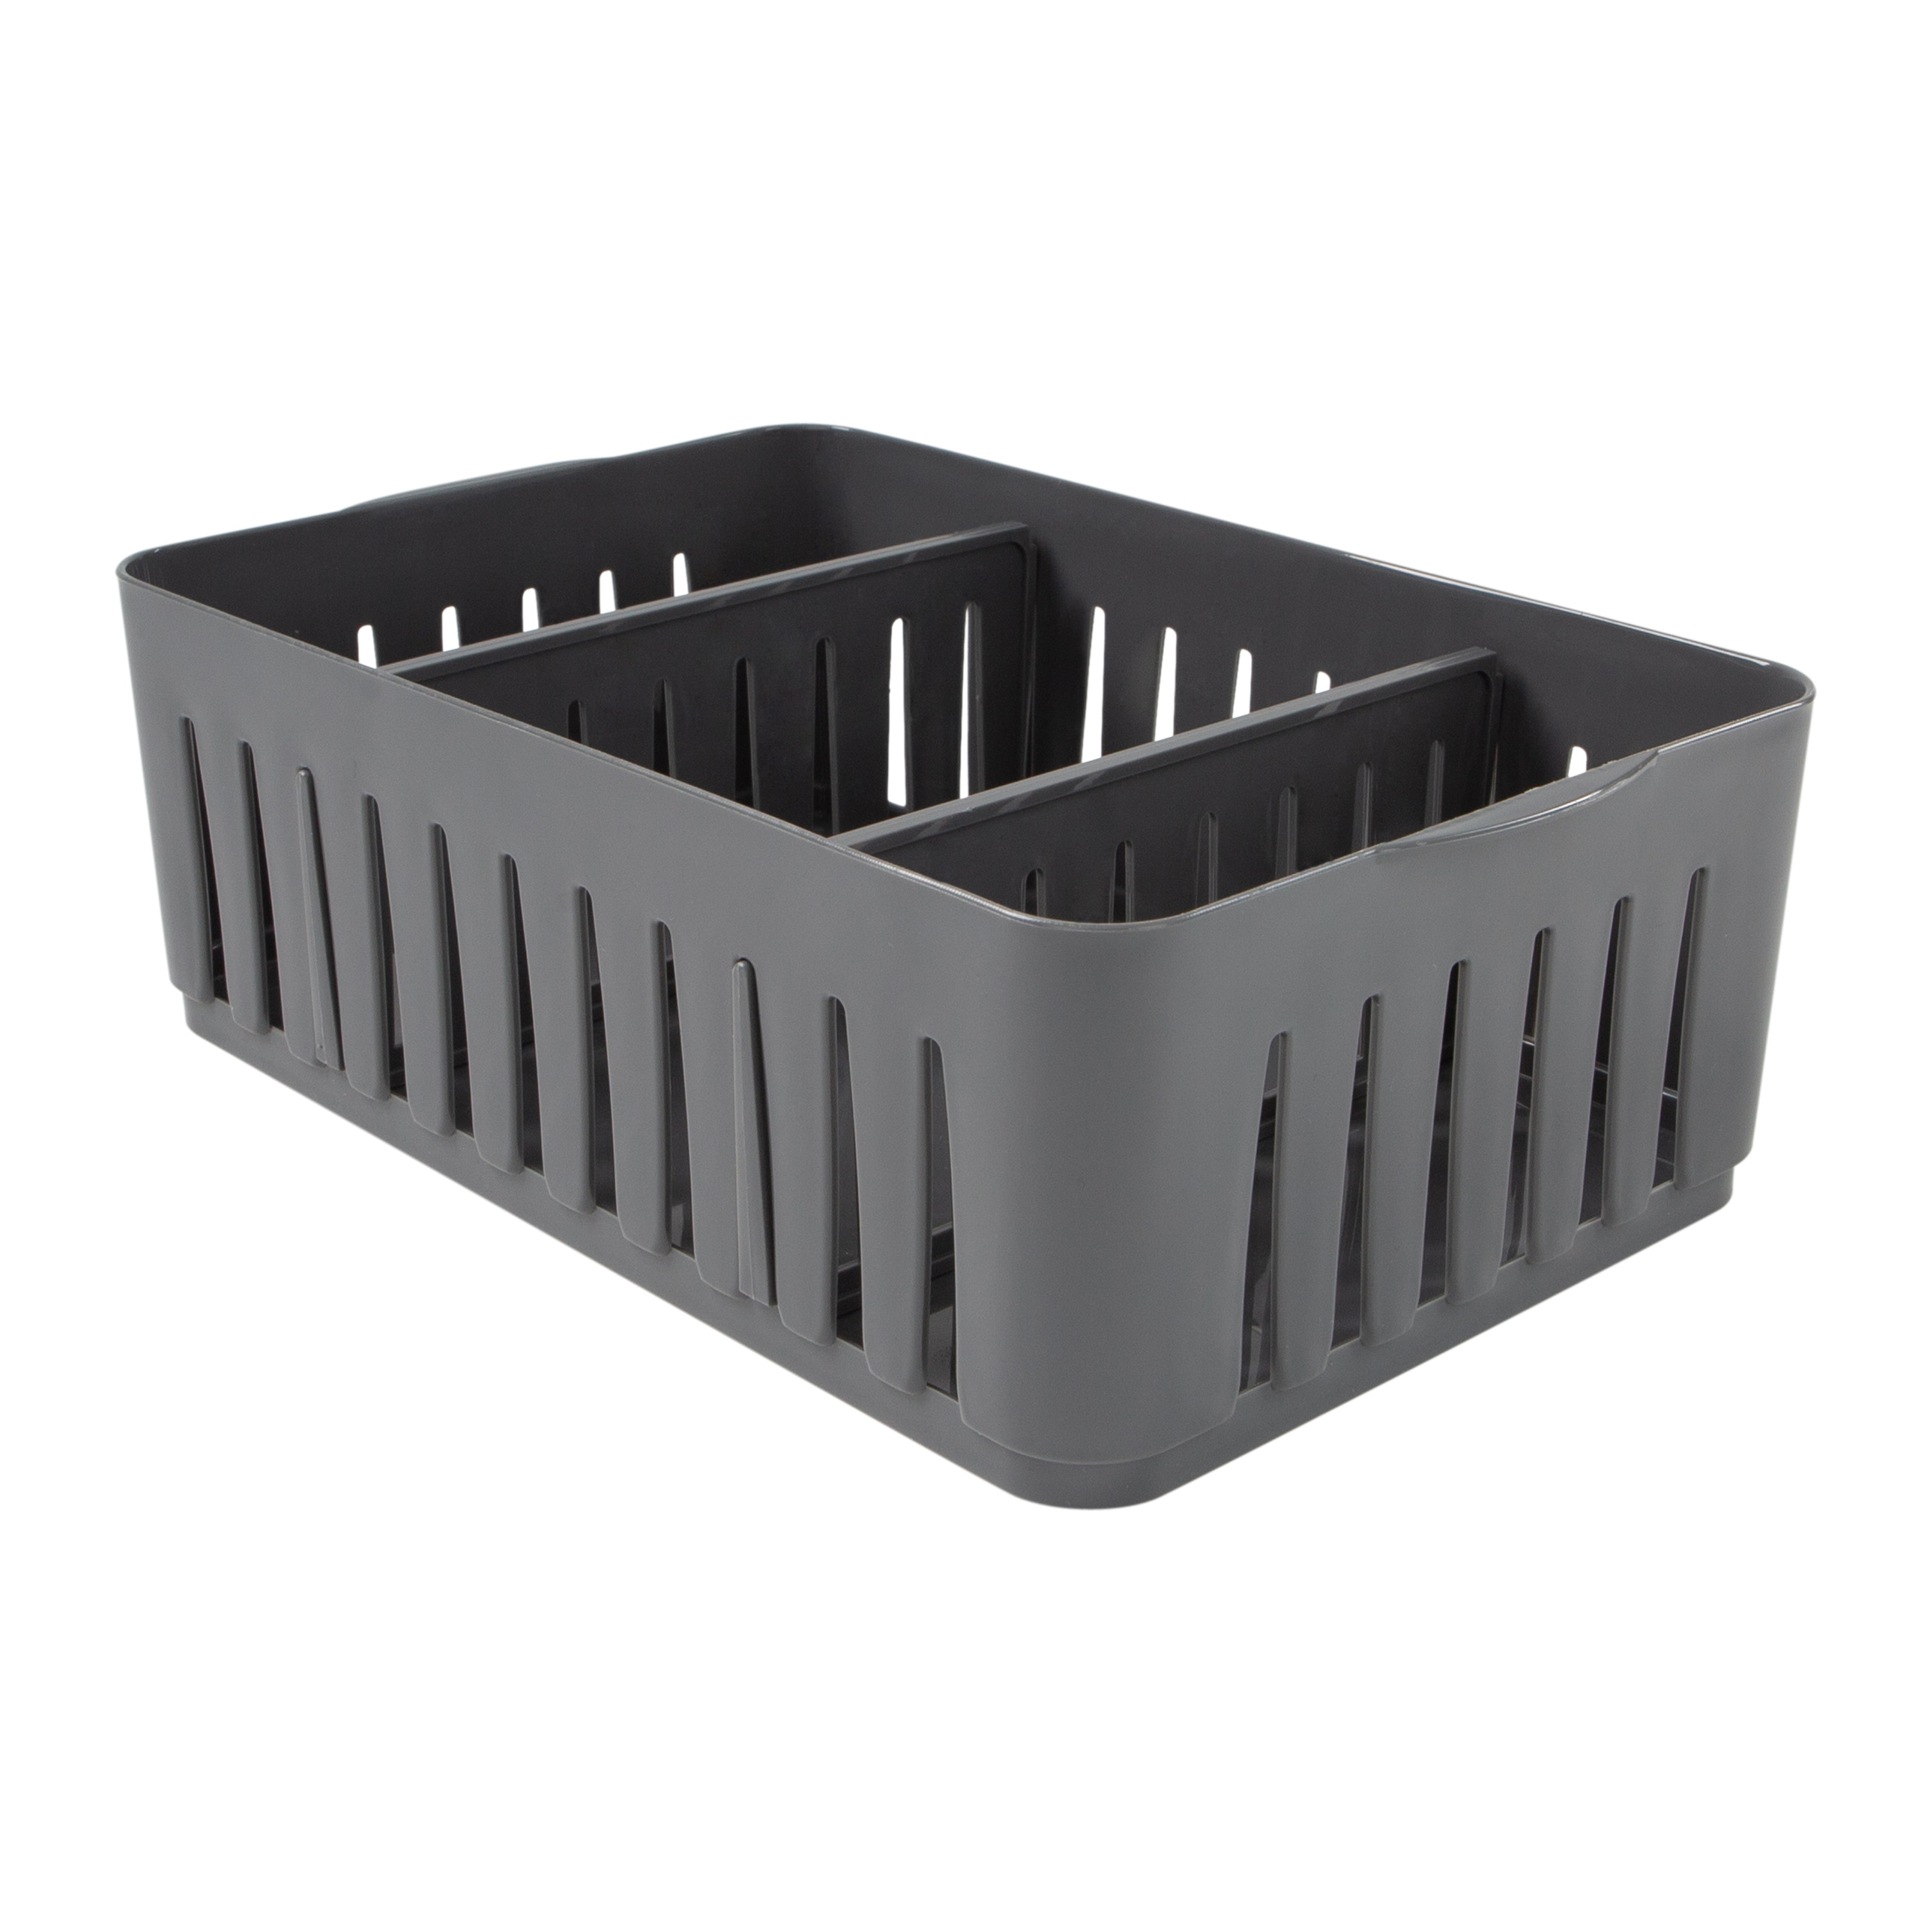 Simplify 4 Pack Stackable Organizer Bin with Adjustable Dividers in Grey